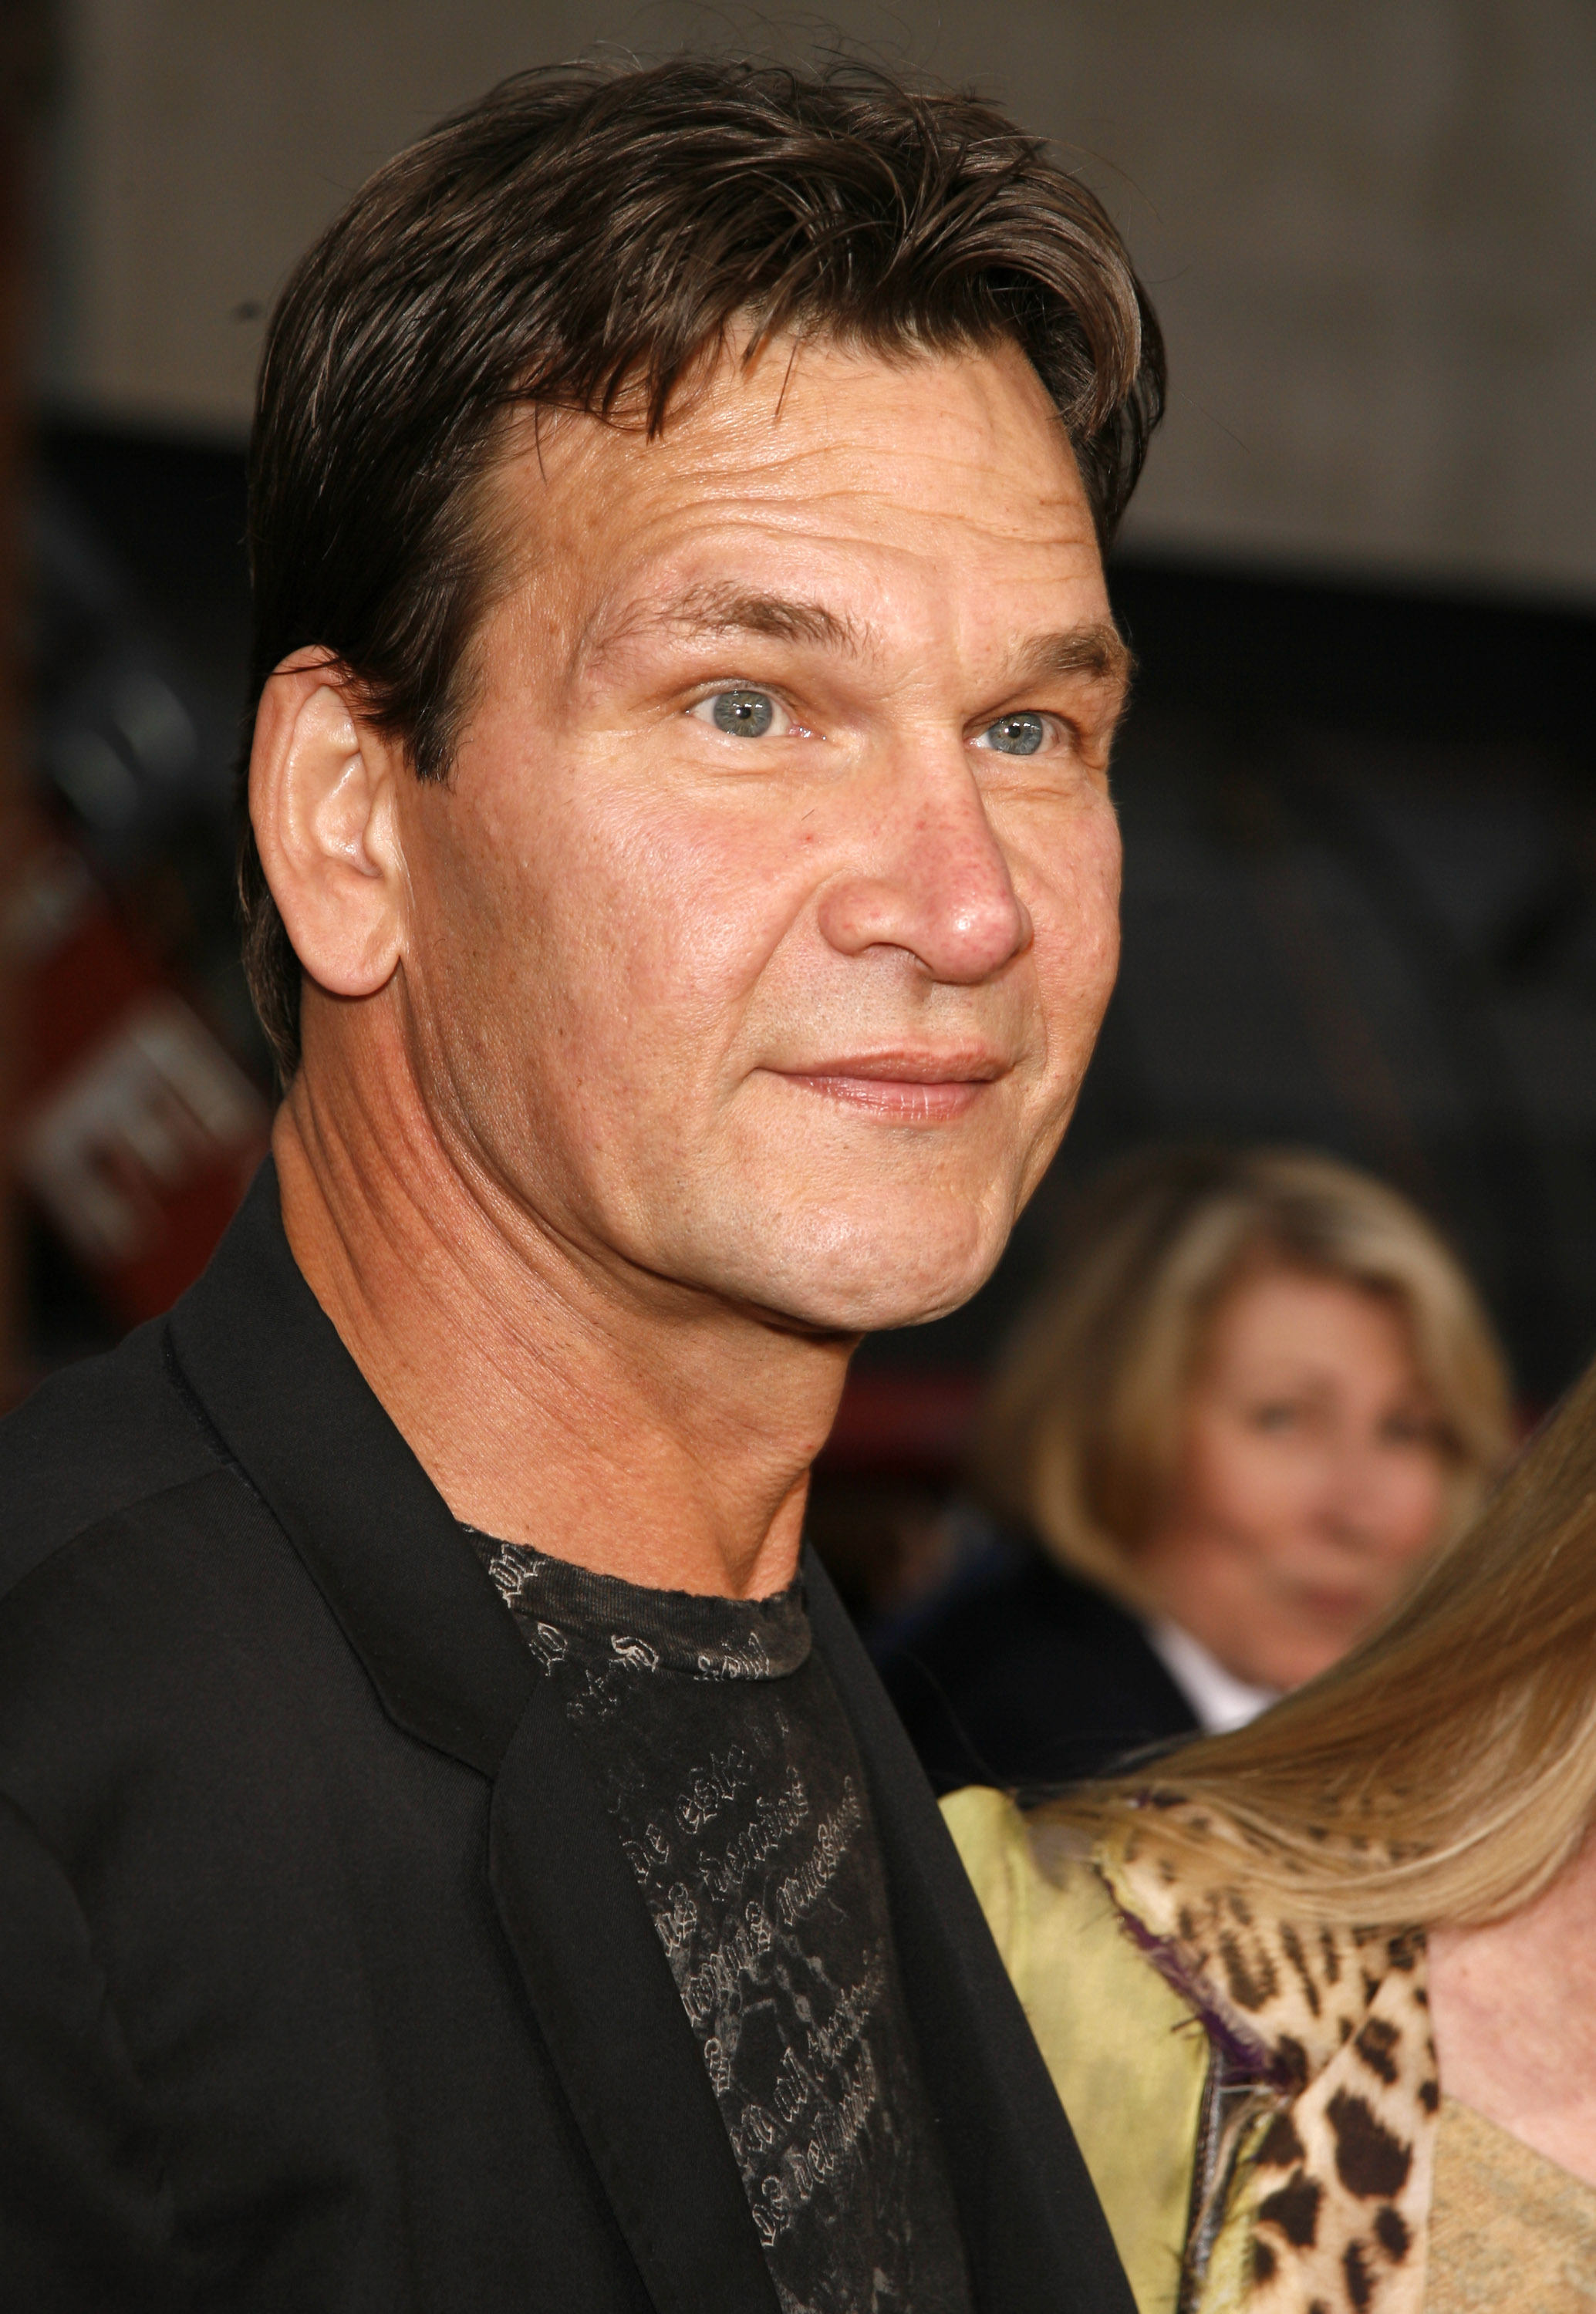 Patrick Swayze in Los Angeles in 2006 | Source: Getty images